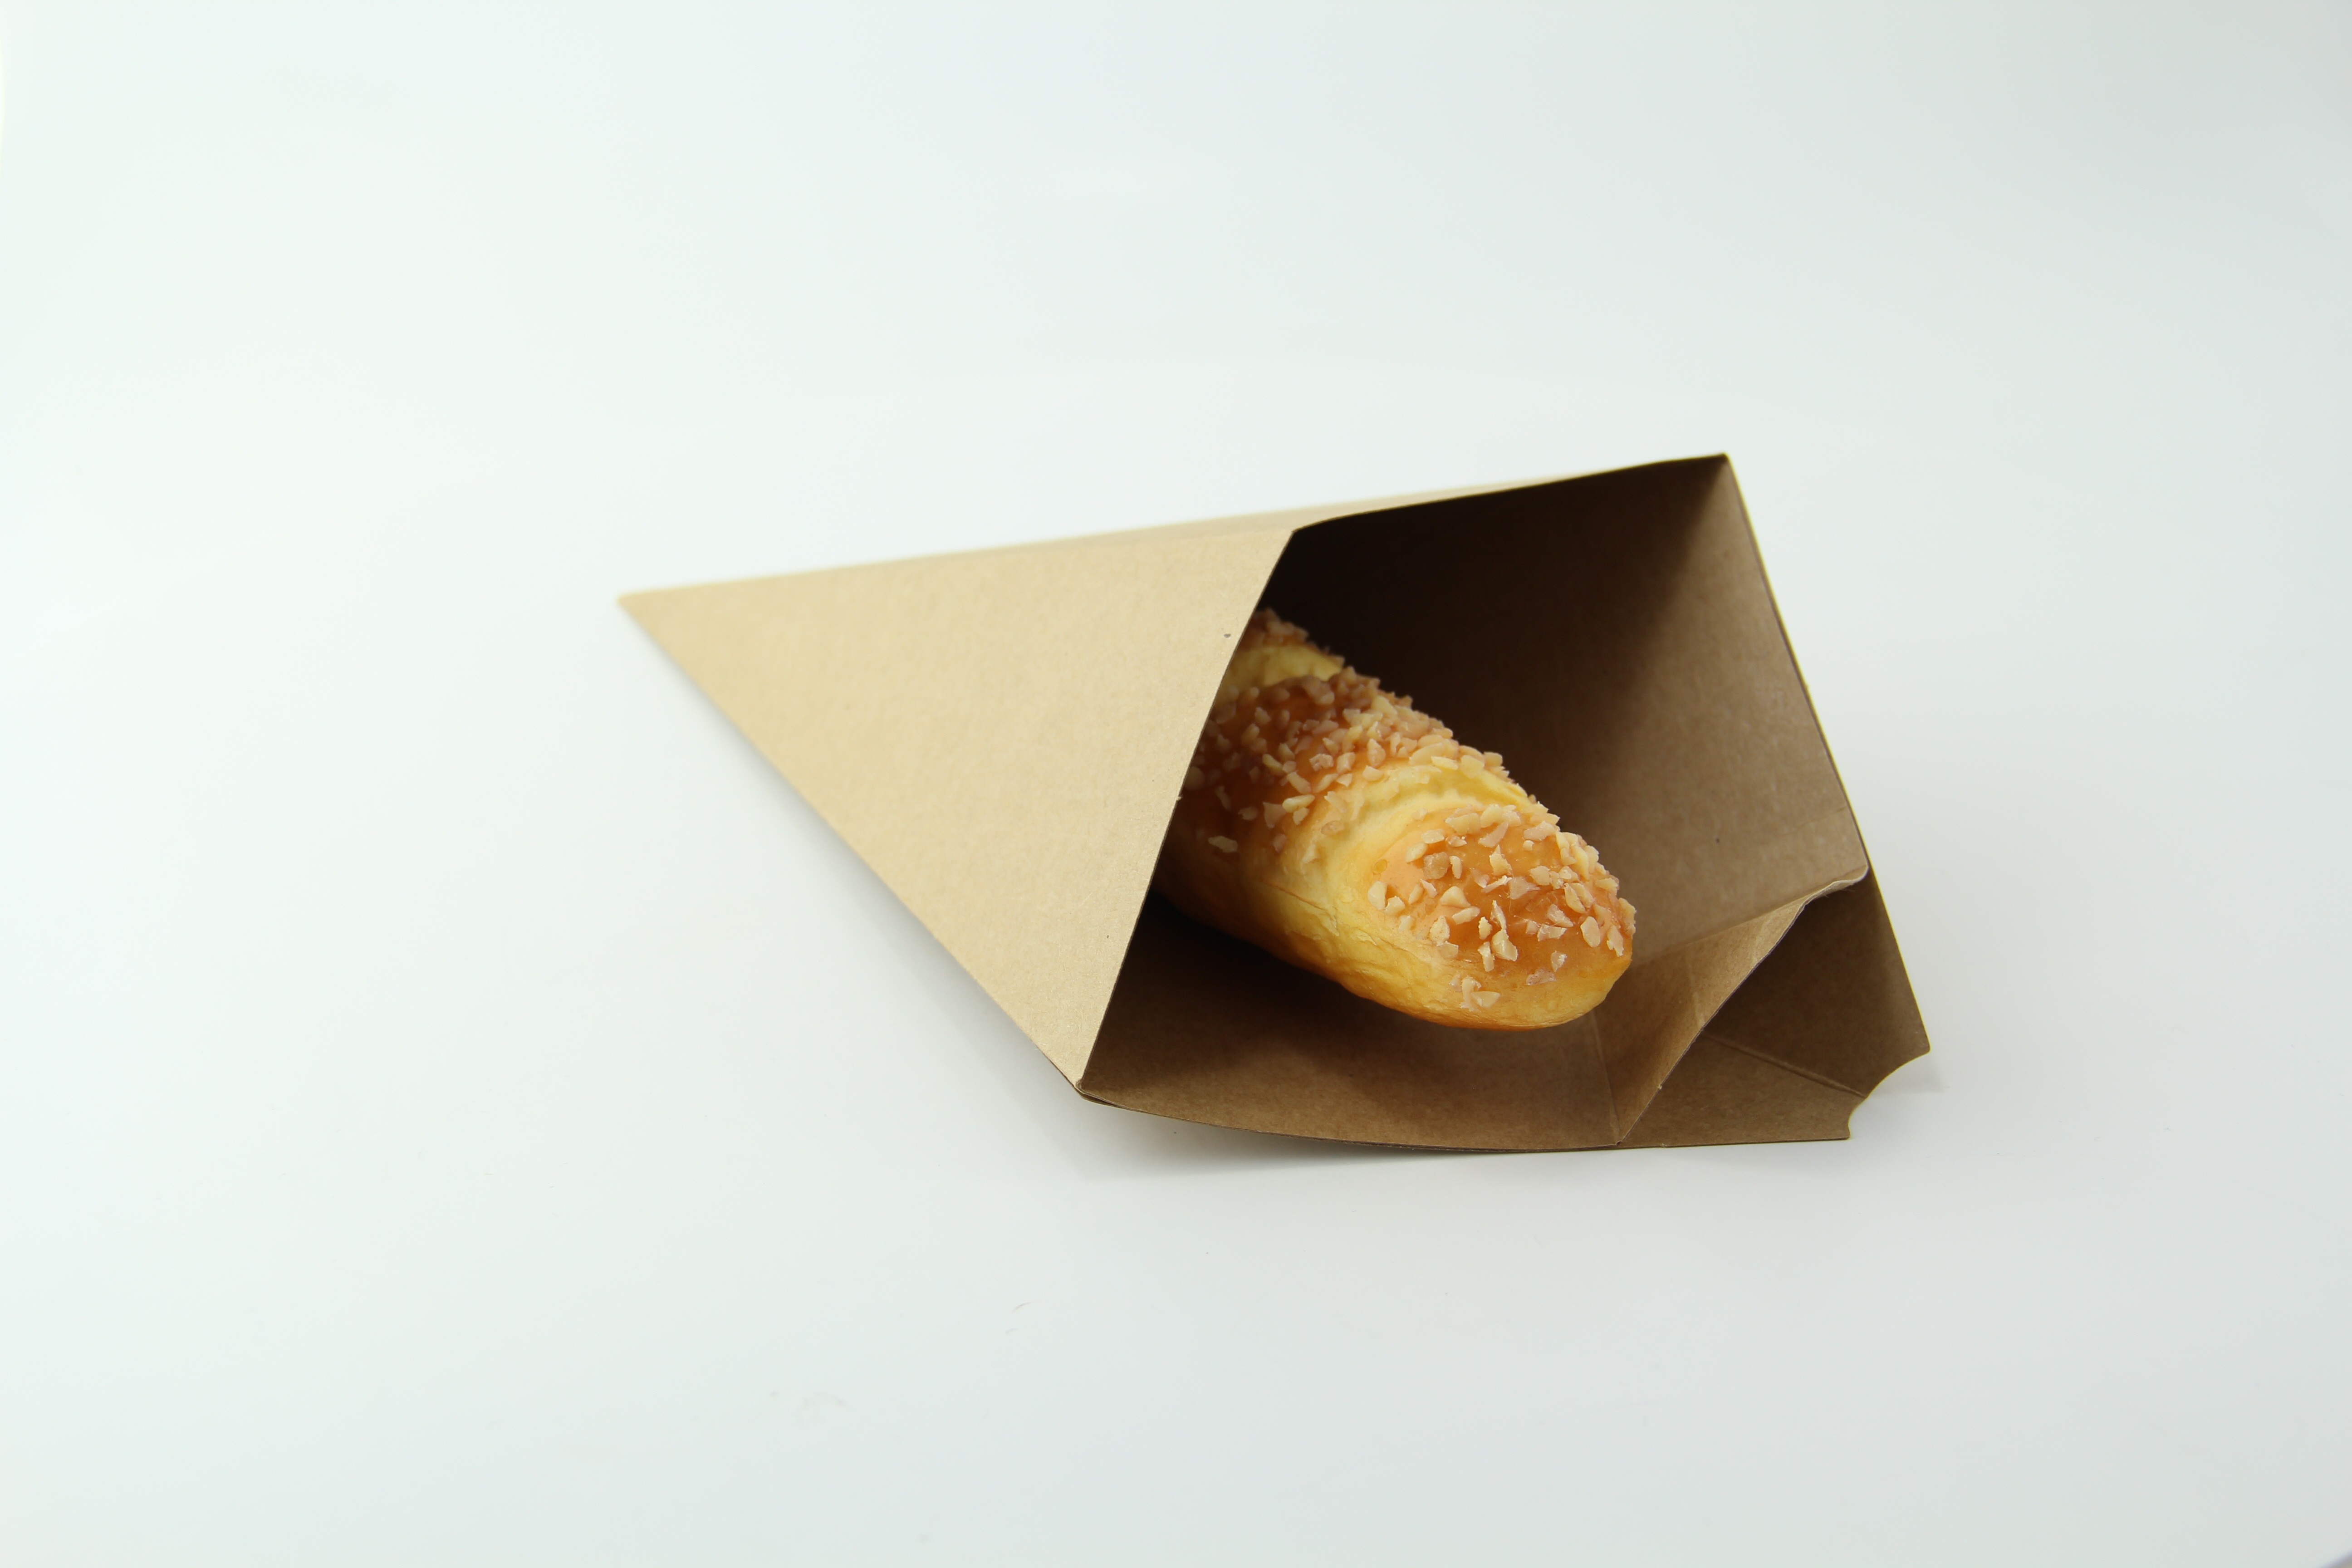 Packnwood White Paper Cones with Built in Dipping Sauce